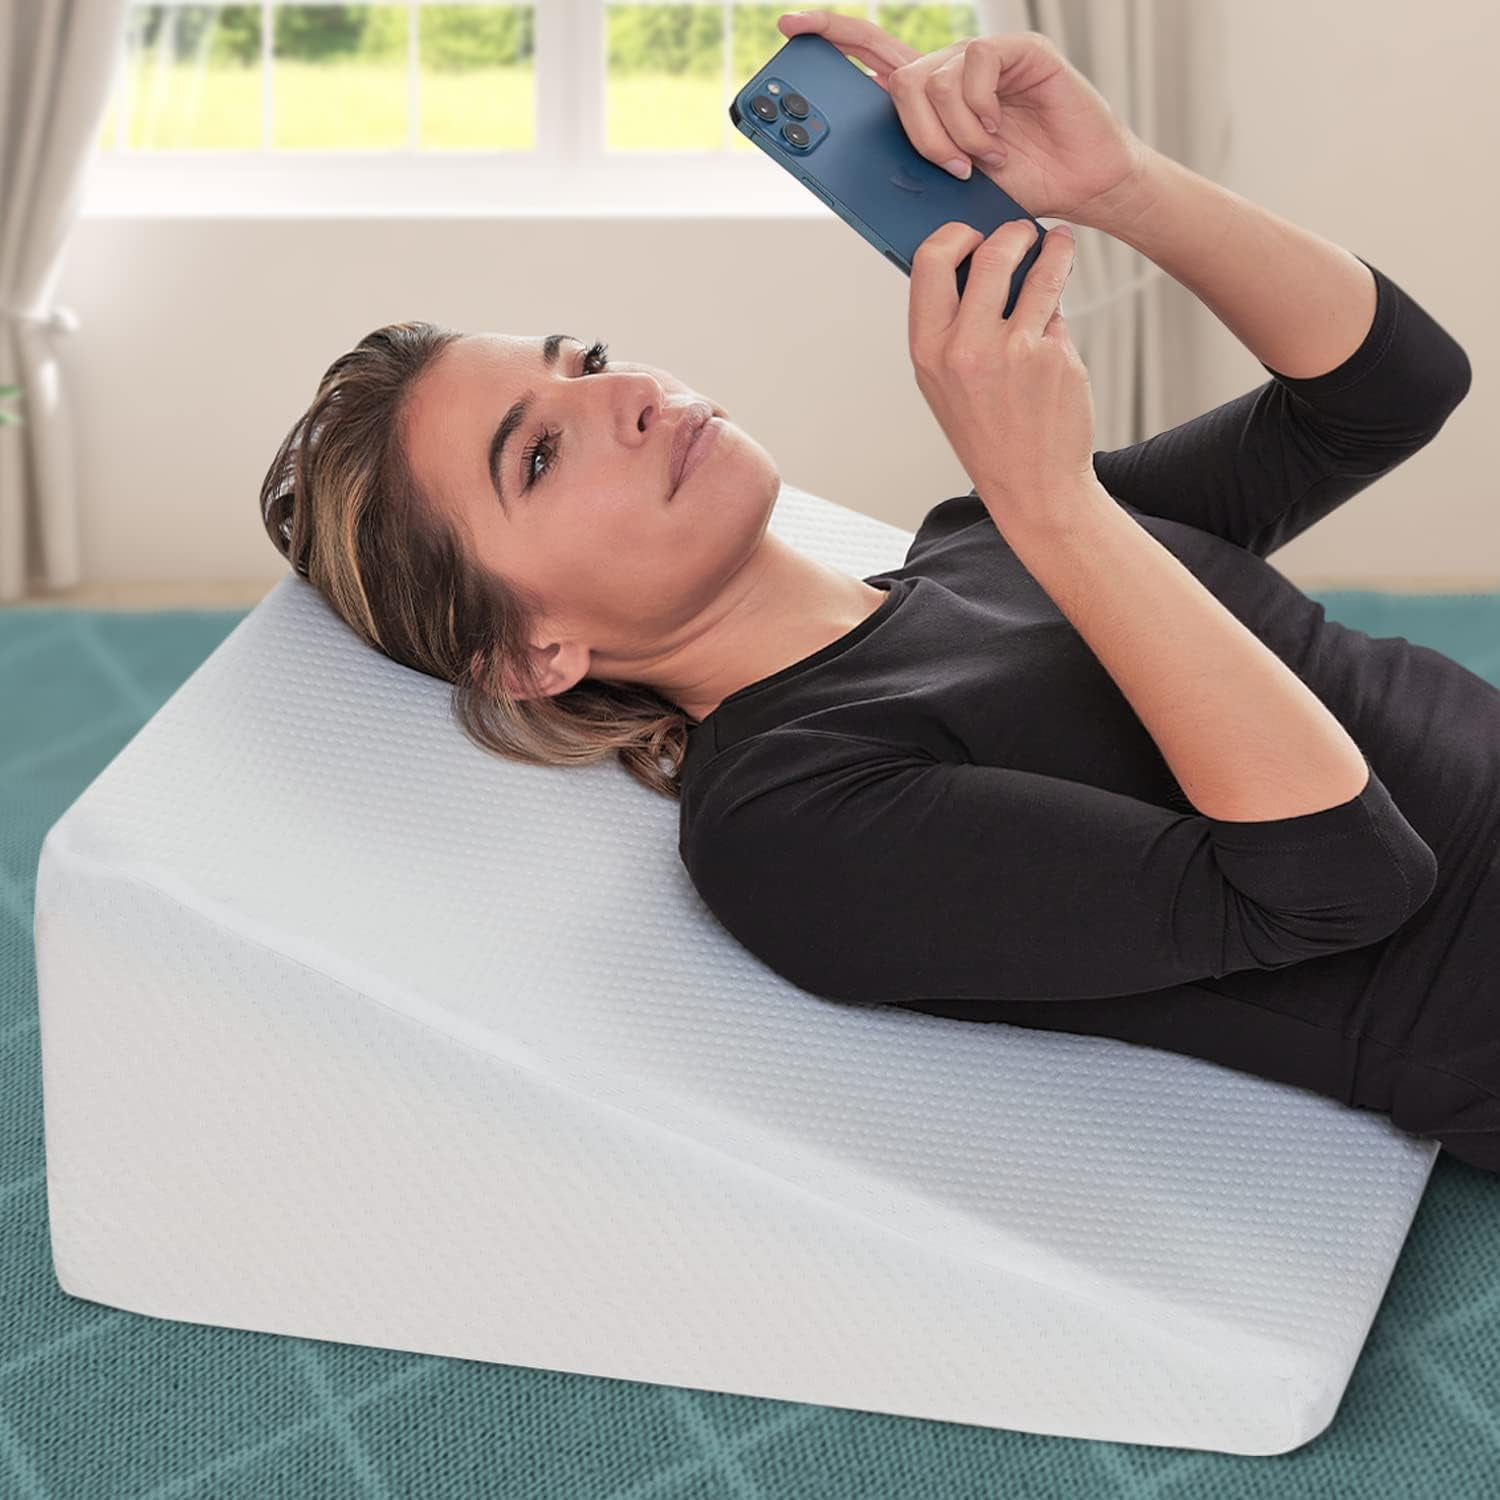 Bed Wedge Pillow – 2 Separate Memory Foam Incline Cushions, System for Legs, Knees and Back Support Pillow | Acid Reflux, Anti Snoring, Heartburn, Rea